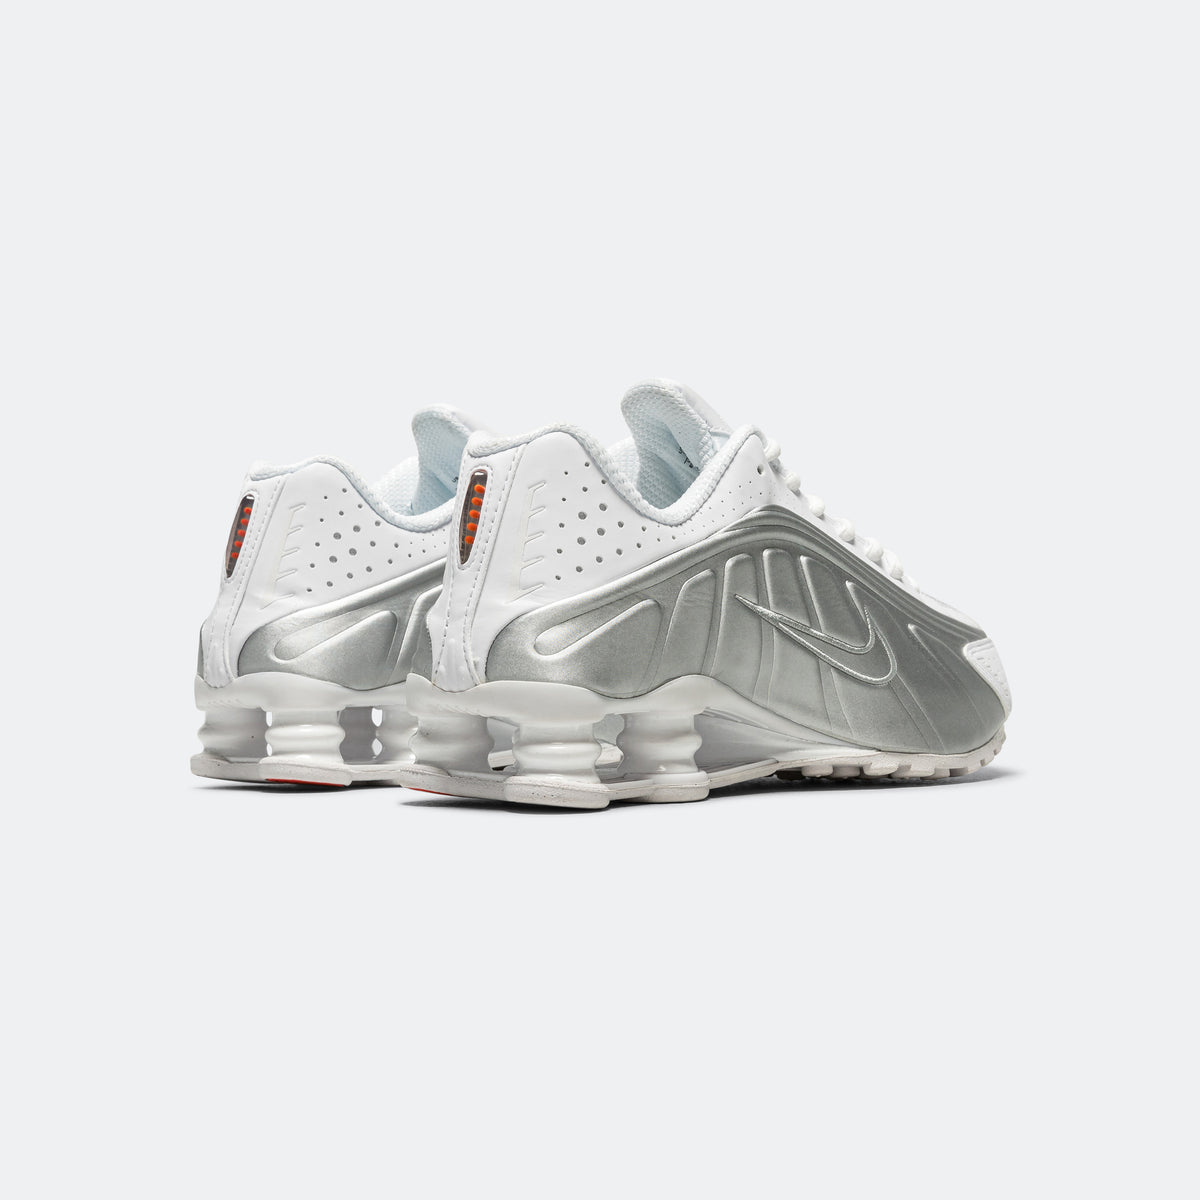 Nike Shox R4 White Metallic Silver Trainers Sneakers shoes Silver US 5.5